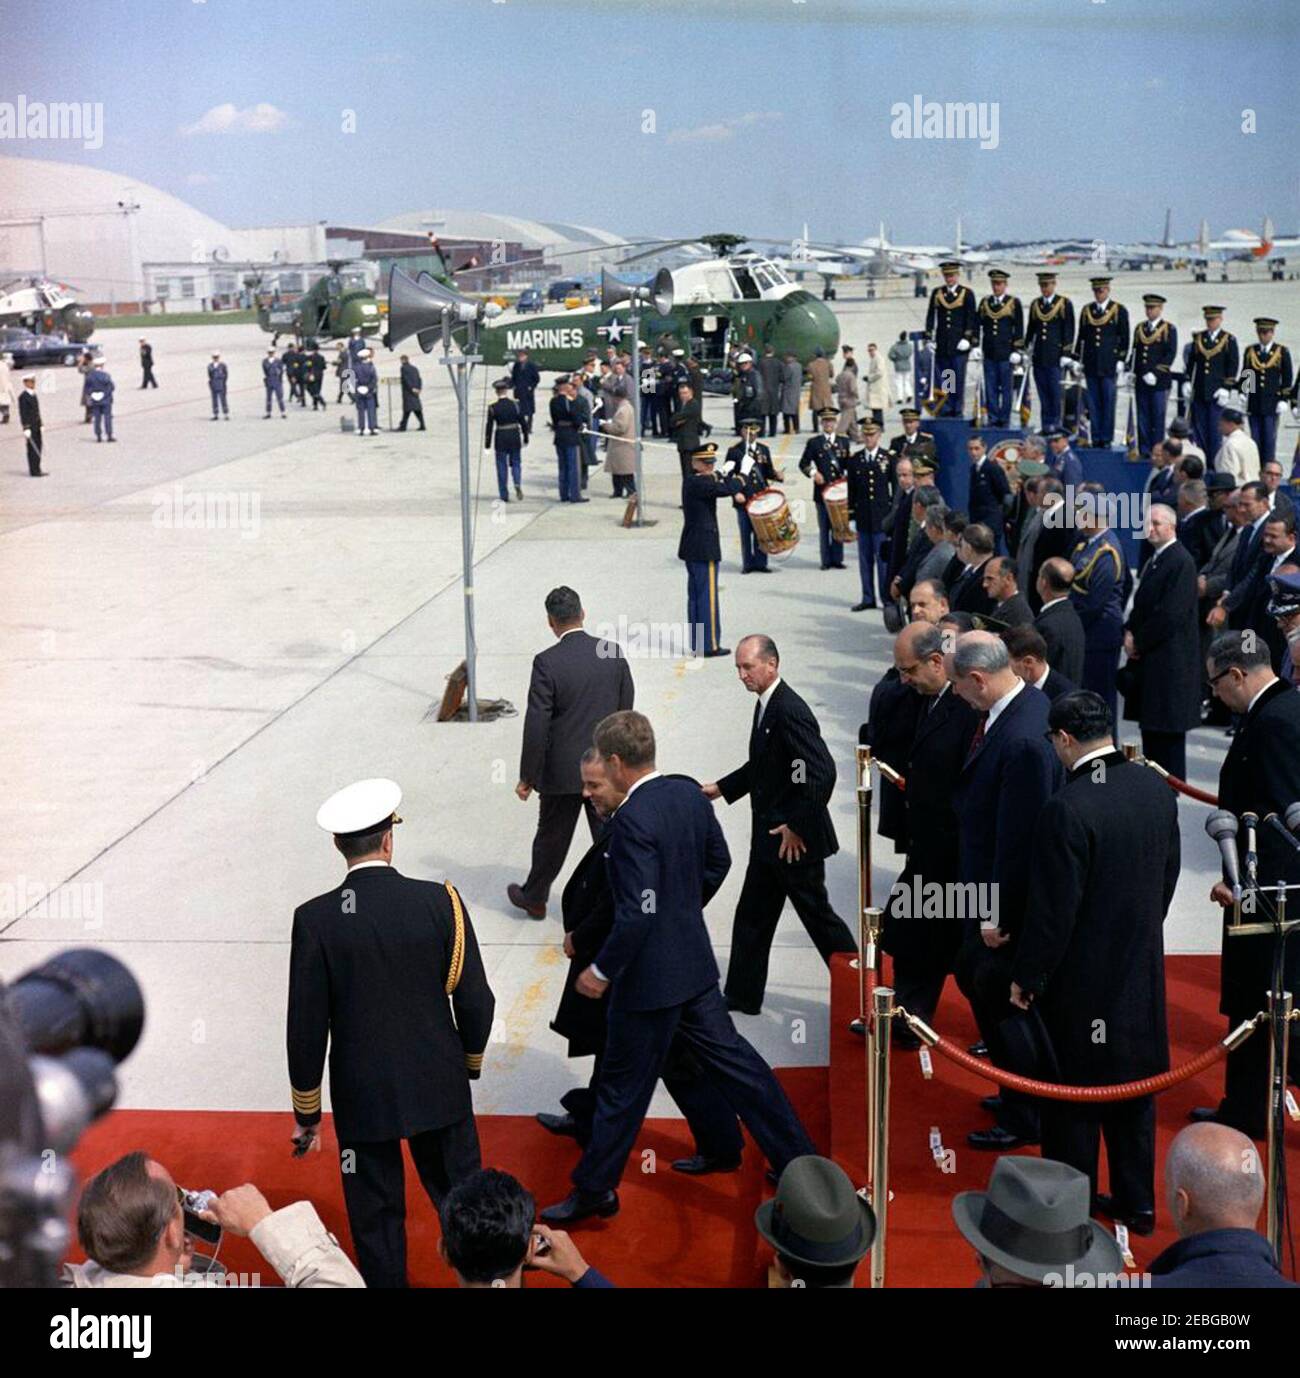 Arrival ceremony for Jou00e3o Goulart, President of Brazil, 10:00AM. President John F. Kennedy and President of Brazil Jou00e3o Goulart leave the reviewing platform during arrival ceremonies for President Goulart at Andrews Air Force Base, Maryland. Walking in front of the platform (L-R): Naval Aide to the President Captain Tazewell Shepard, Jr. (back to camera), President Kennedy, President Goulart, White House Secret Service agent Gerald A. u201cJerryu201d Behn (back to camera), and Chief of Protocol Angier Biddle Duke (in back). Standing on the platform (L-R): Brazilian Minister of Fore Stock Photo